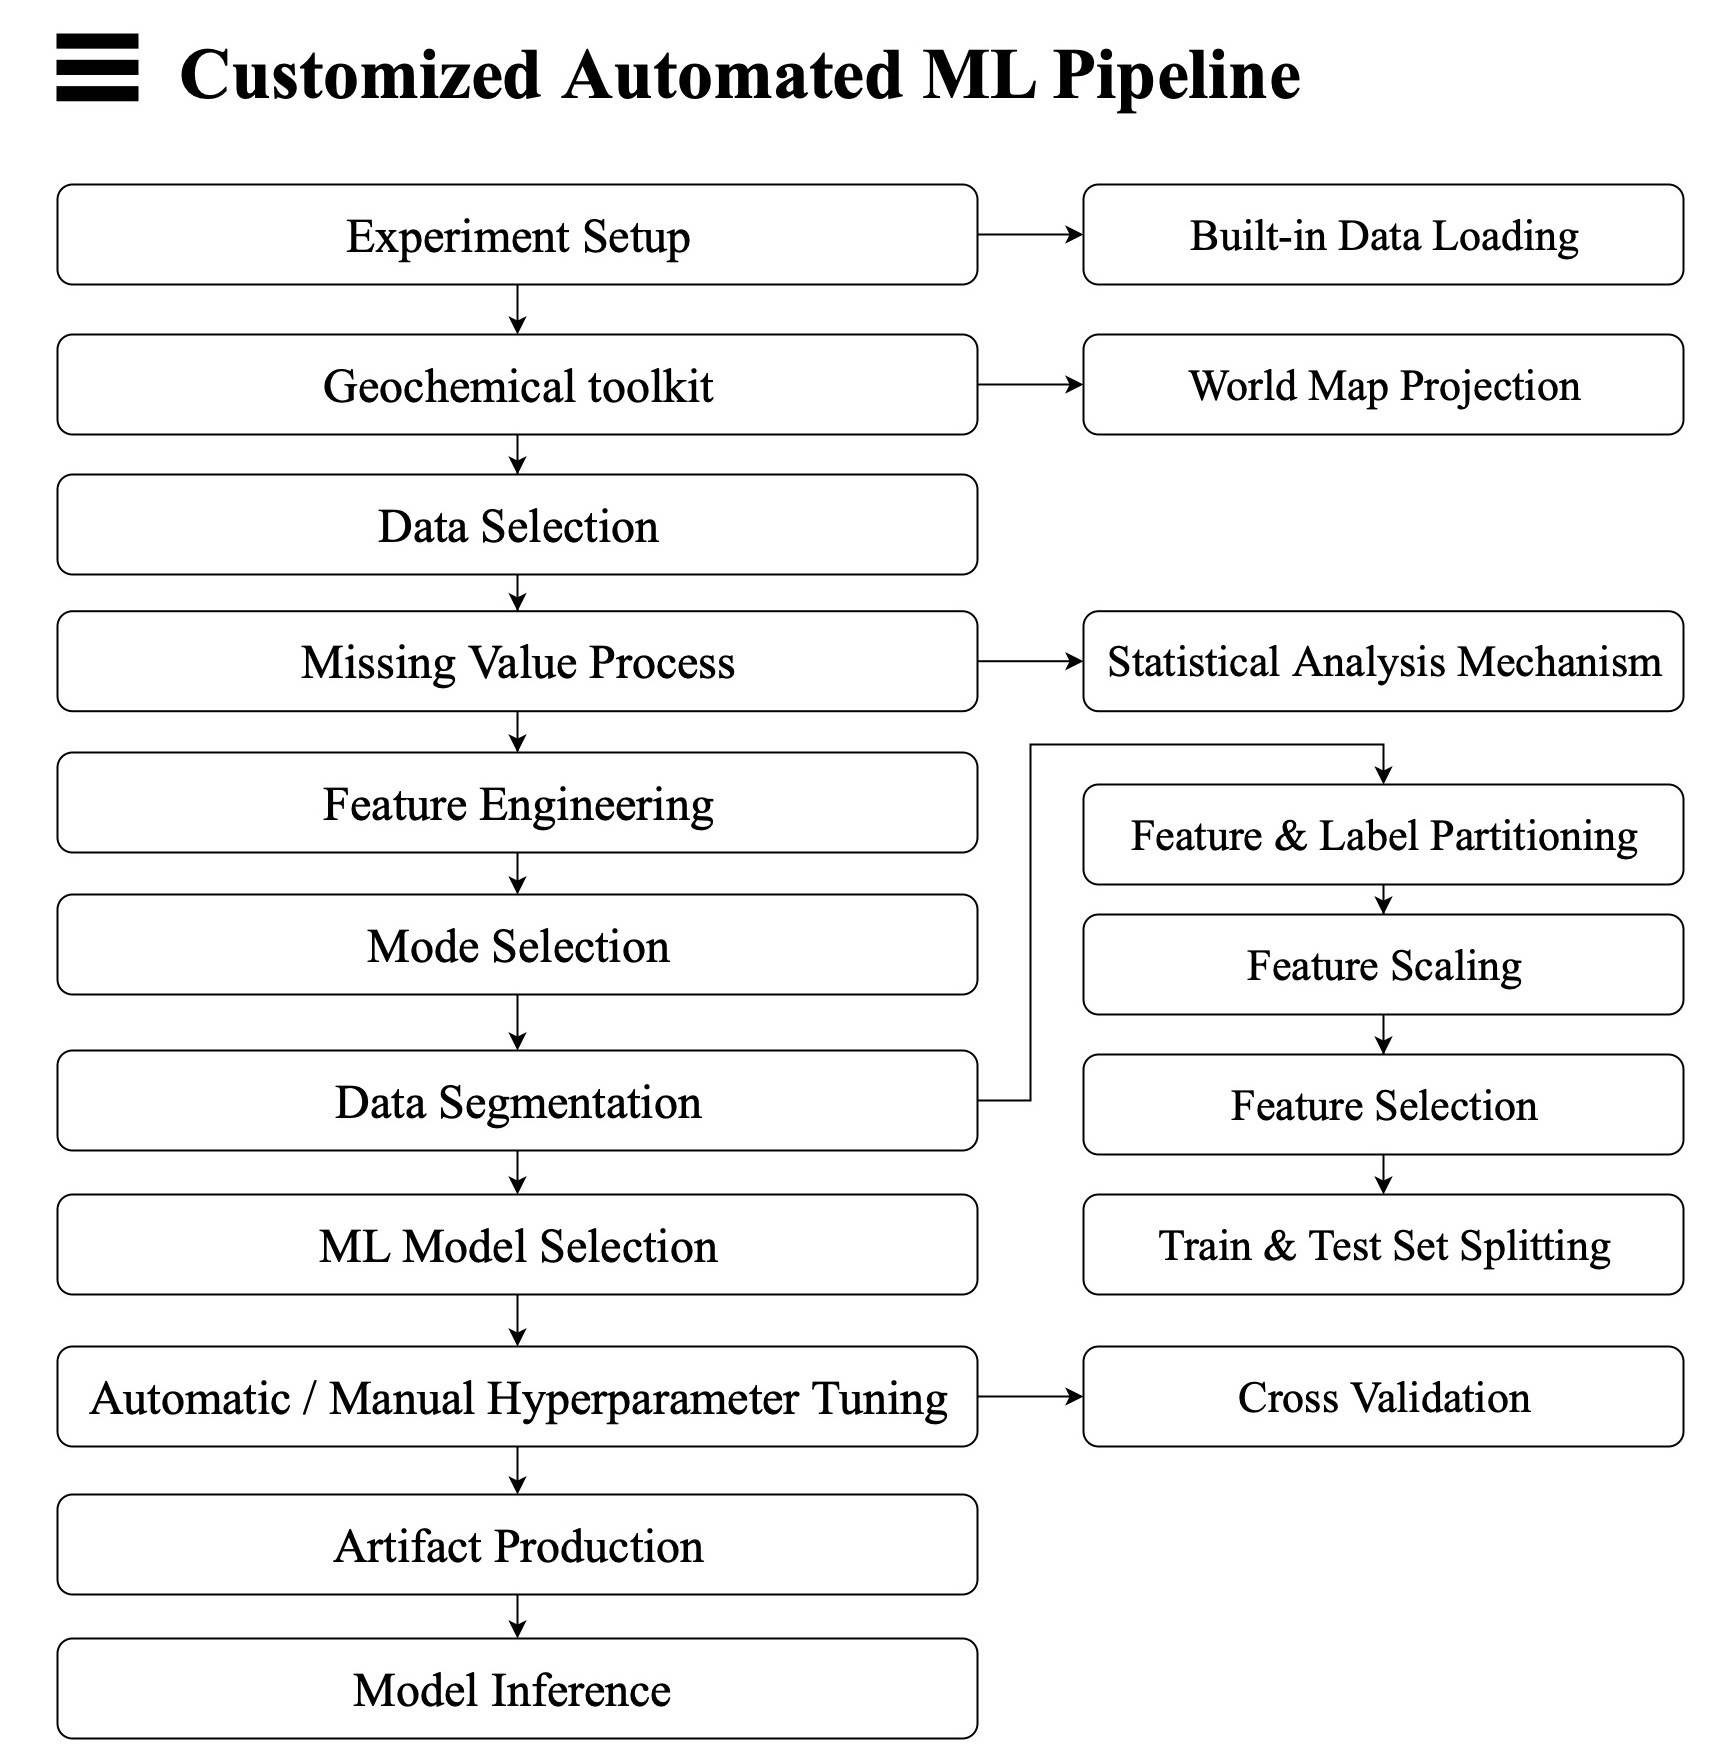 Customized automated ML pipeline